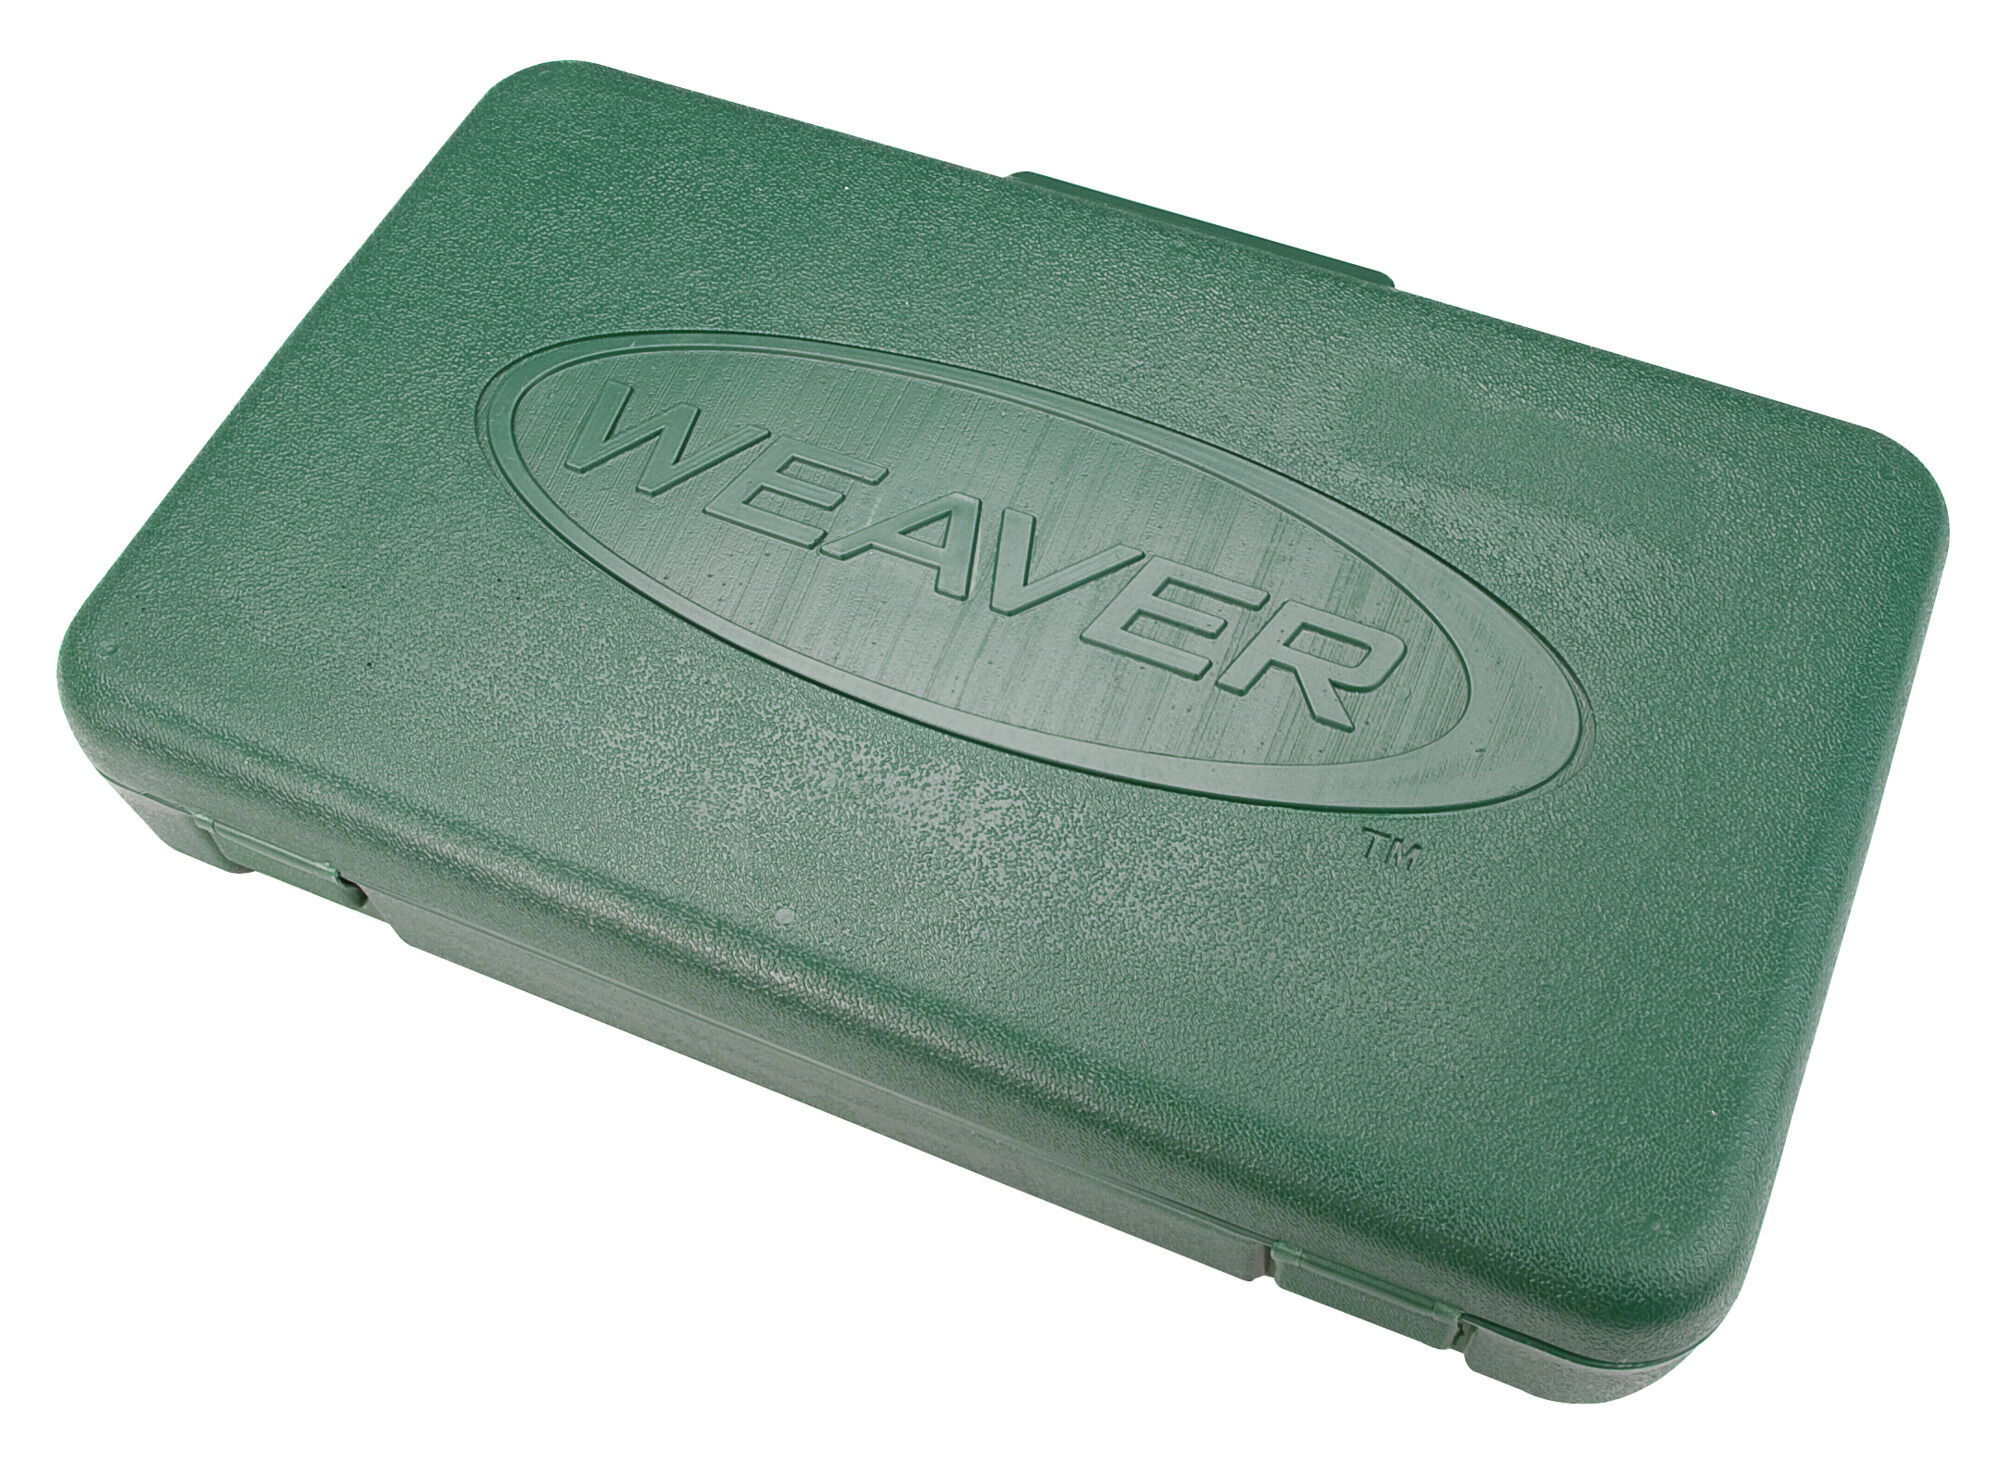 Weaver 849721 Black/Green Deluxe Scope Mounting Tool Kit 1" Lapping Tools 